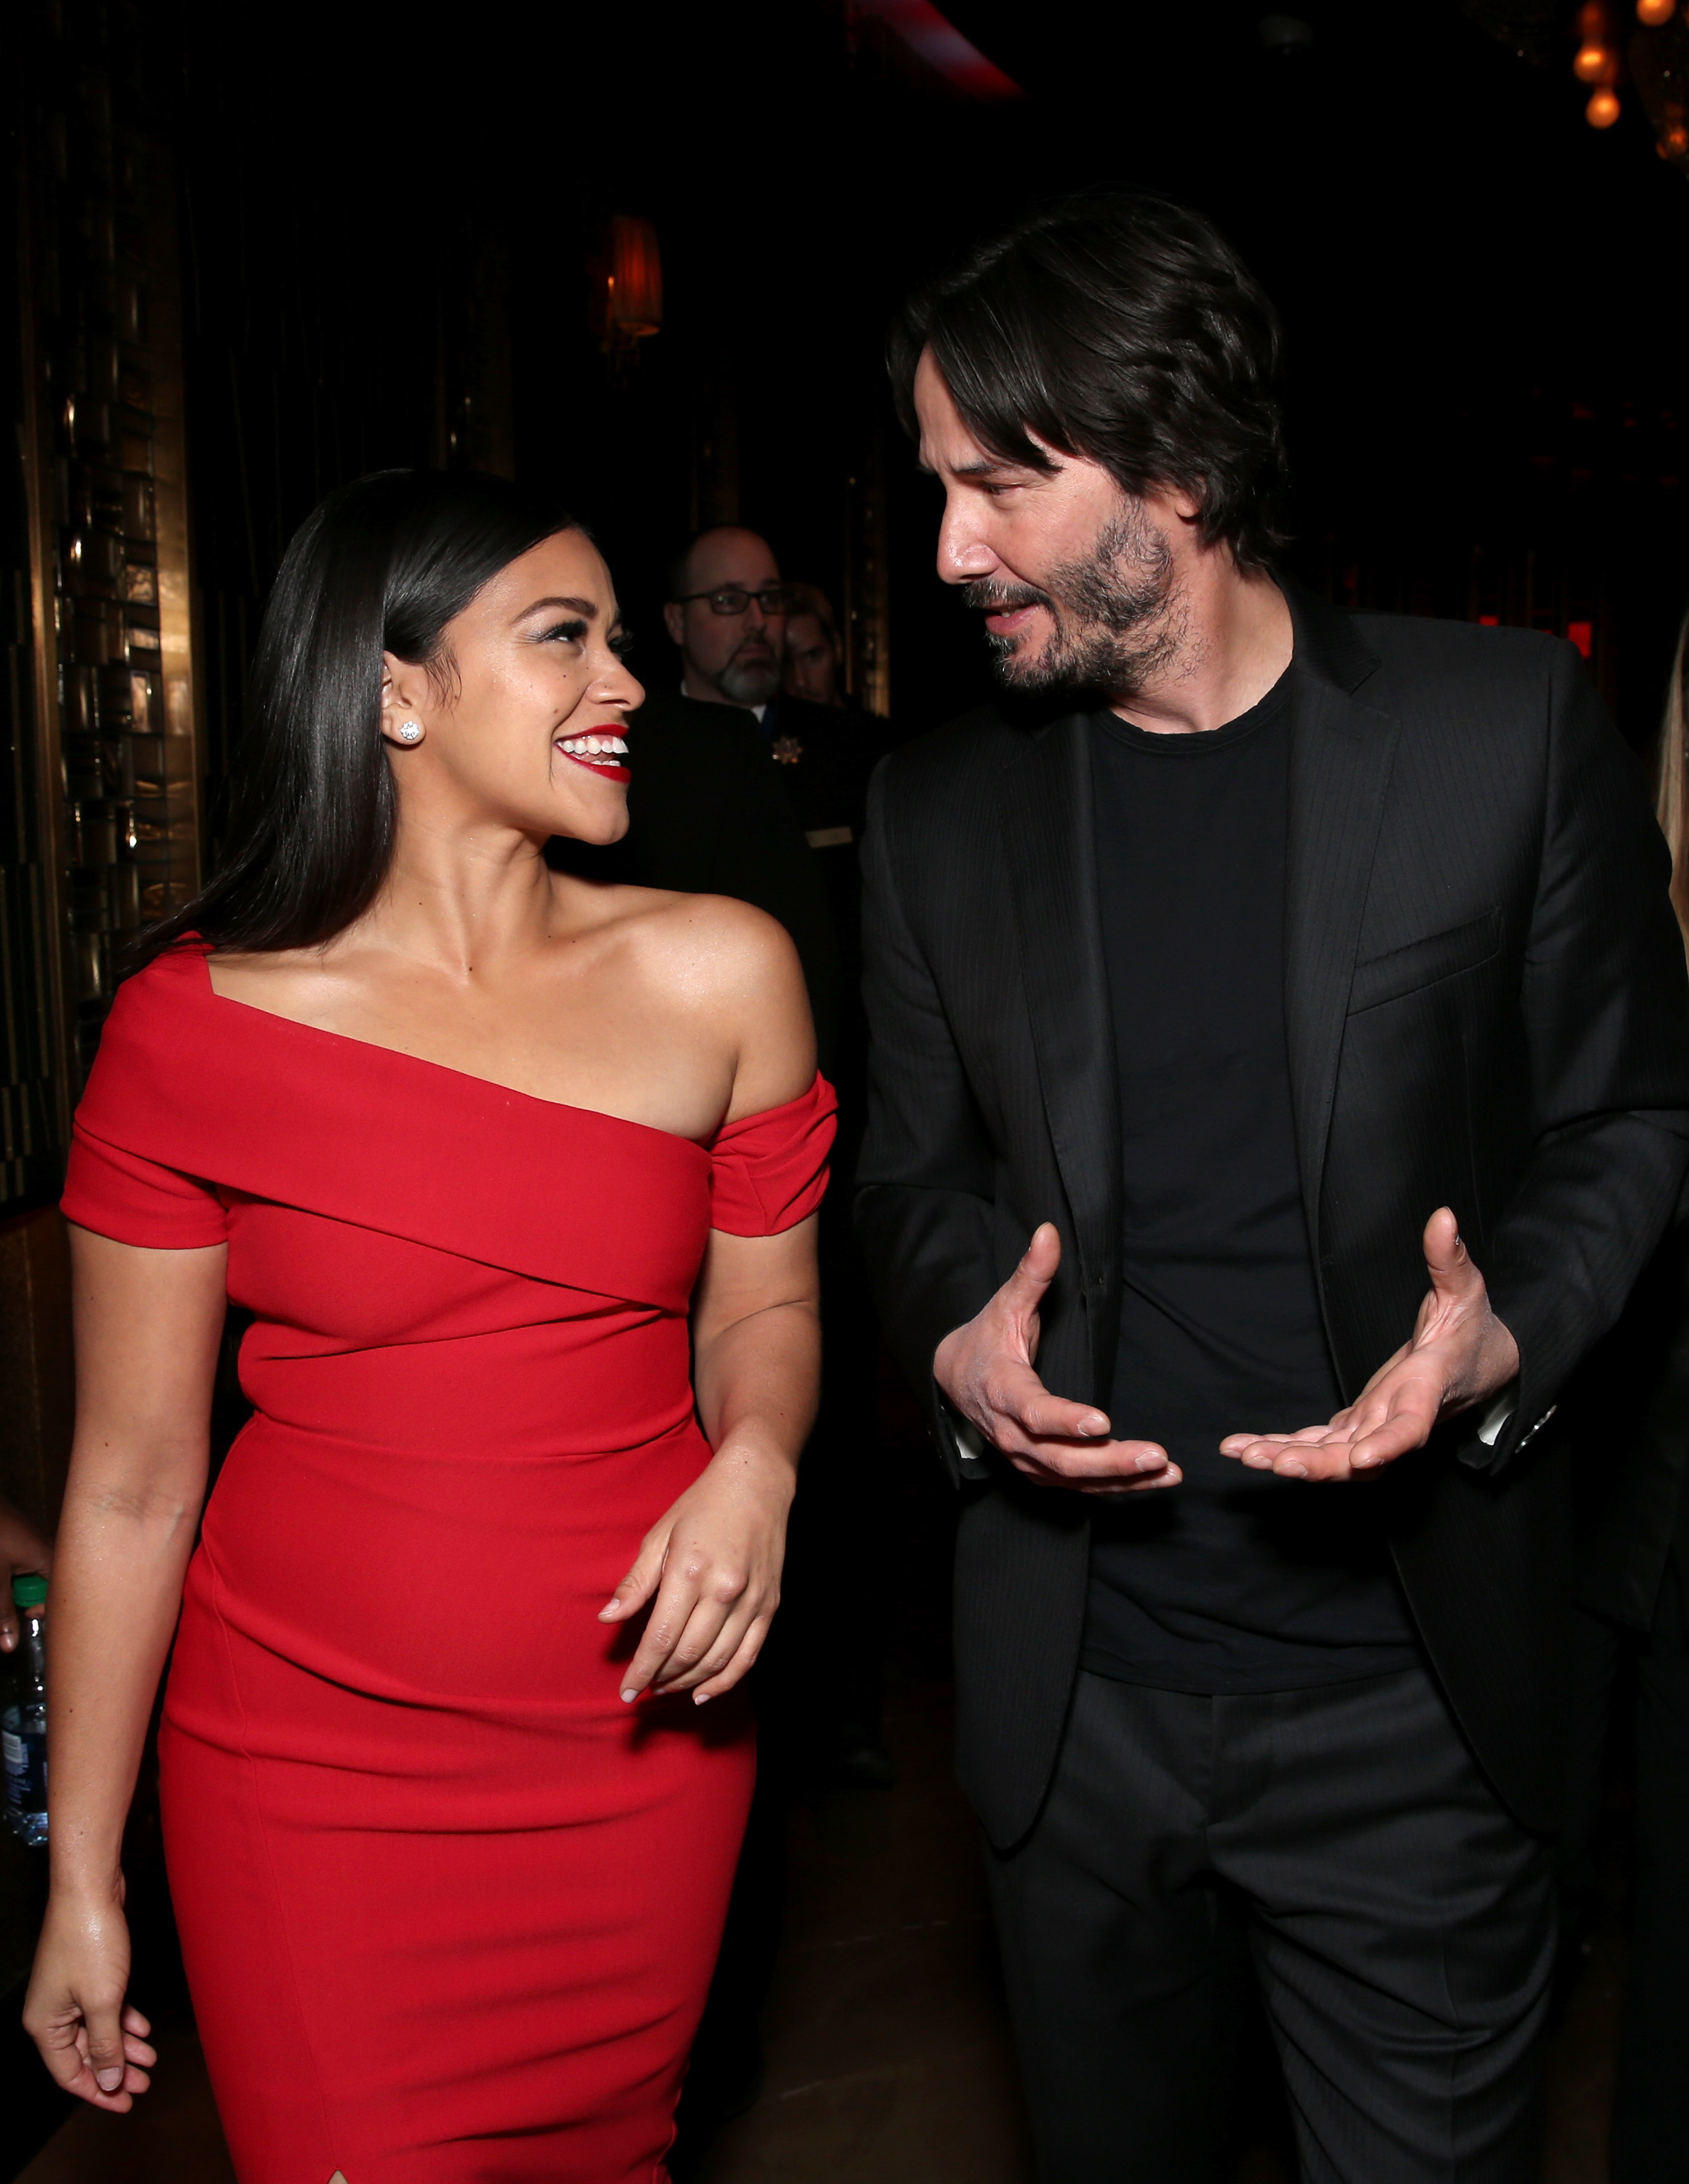 Gina Rodriguez und Keanu Reeves in Las Vegas, Nevada am 14. April 2016 | Quelle: Getty Images